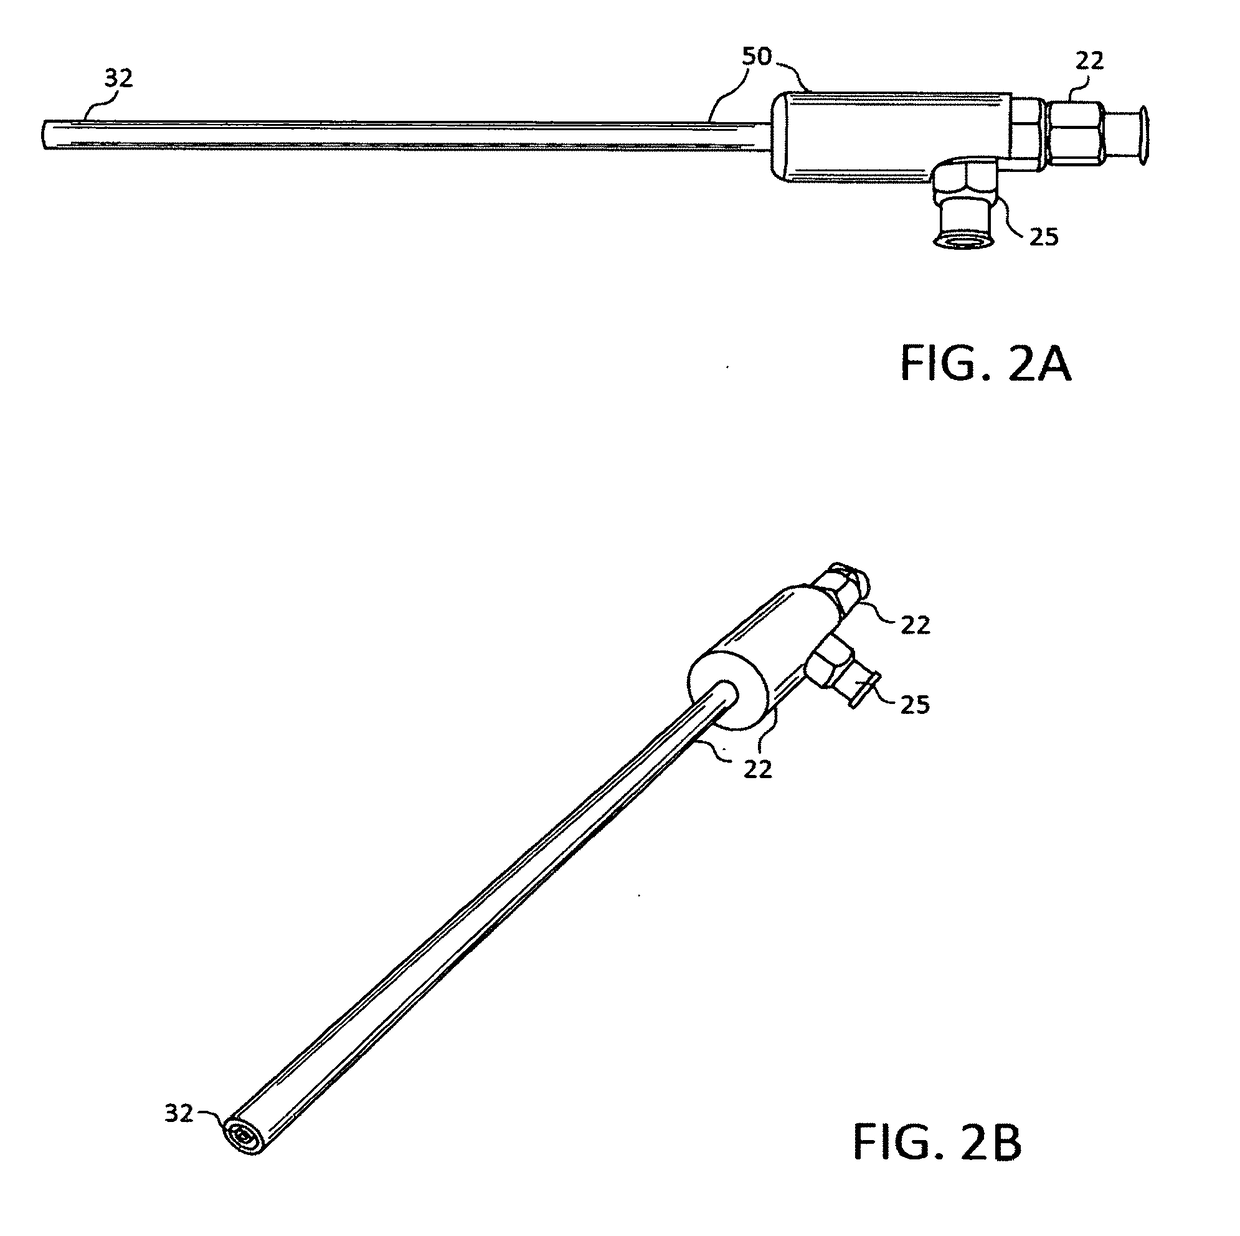 Modular Autoclavable Introducer for Endoscope